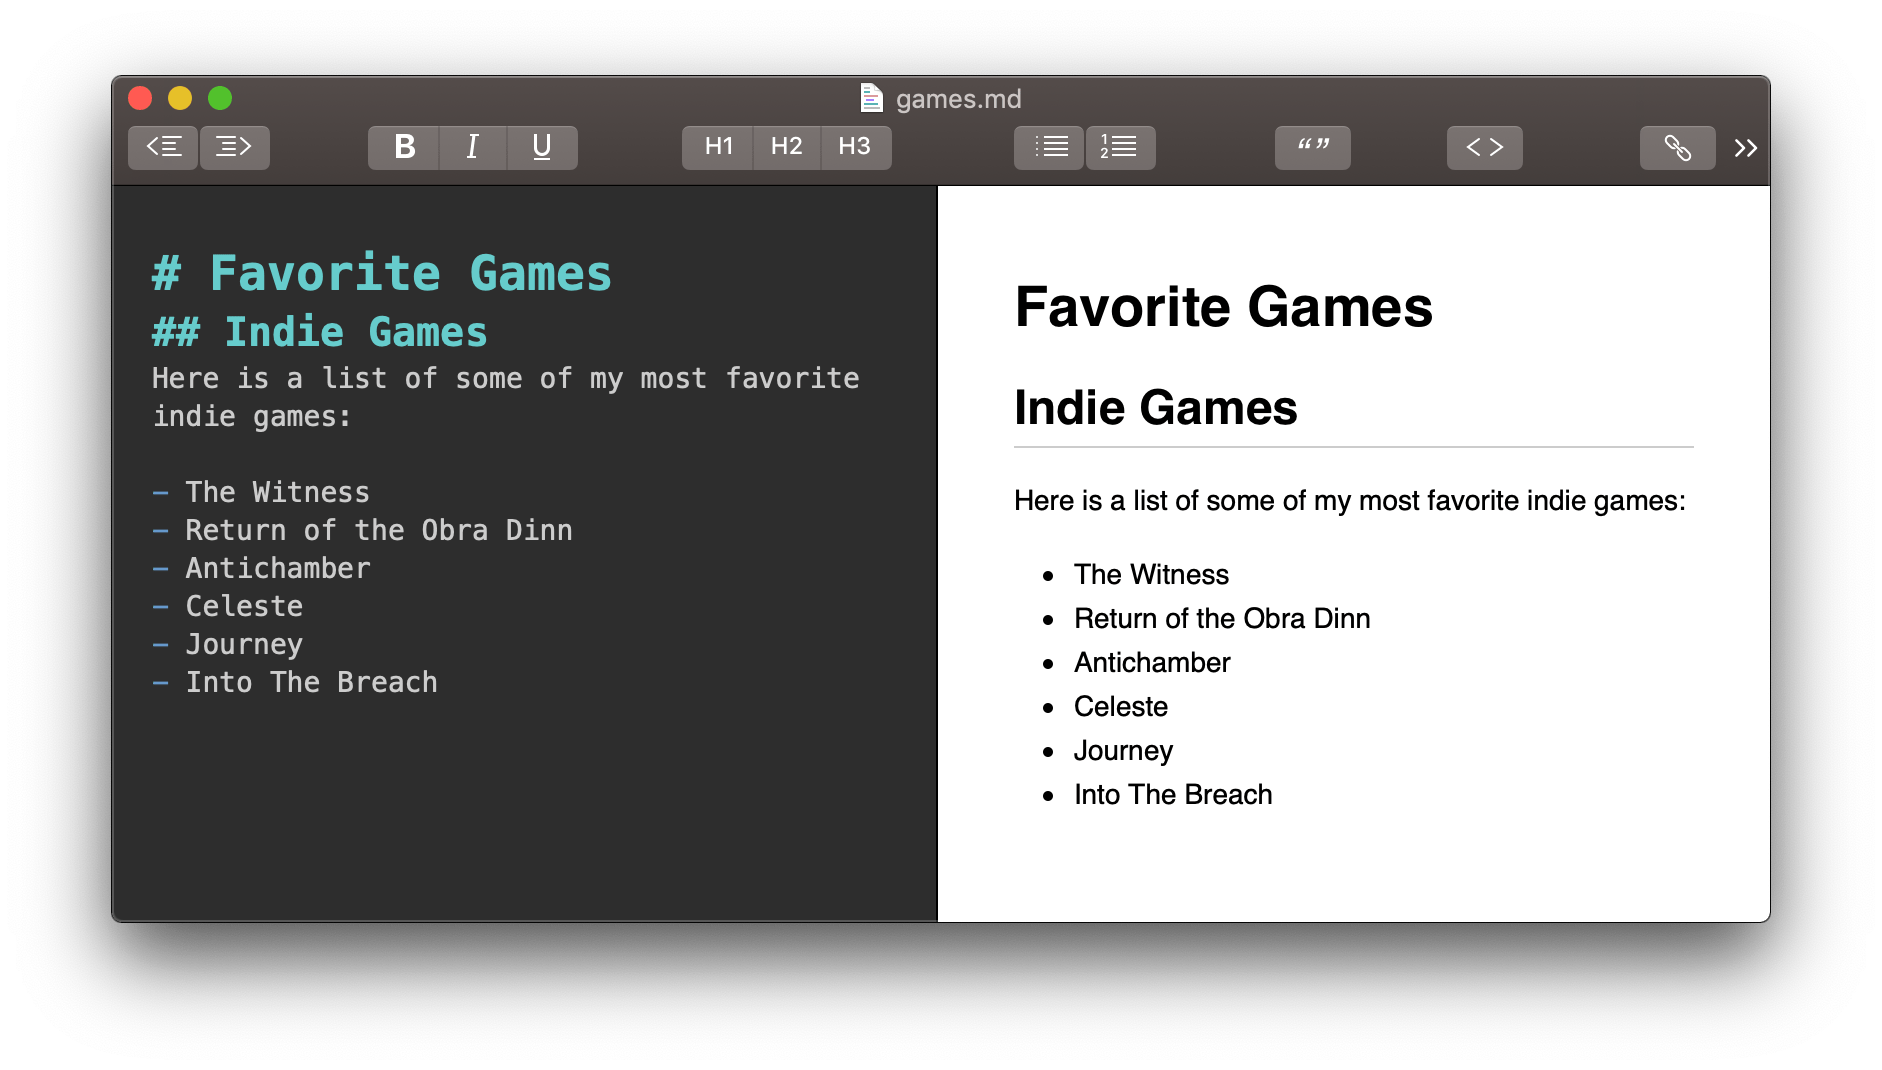 MarkDown Example - My Favorite Games